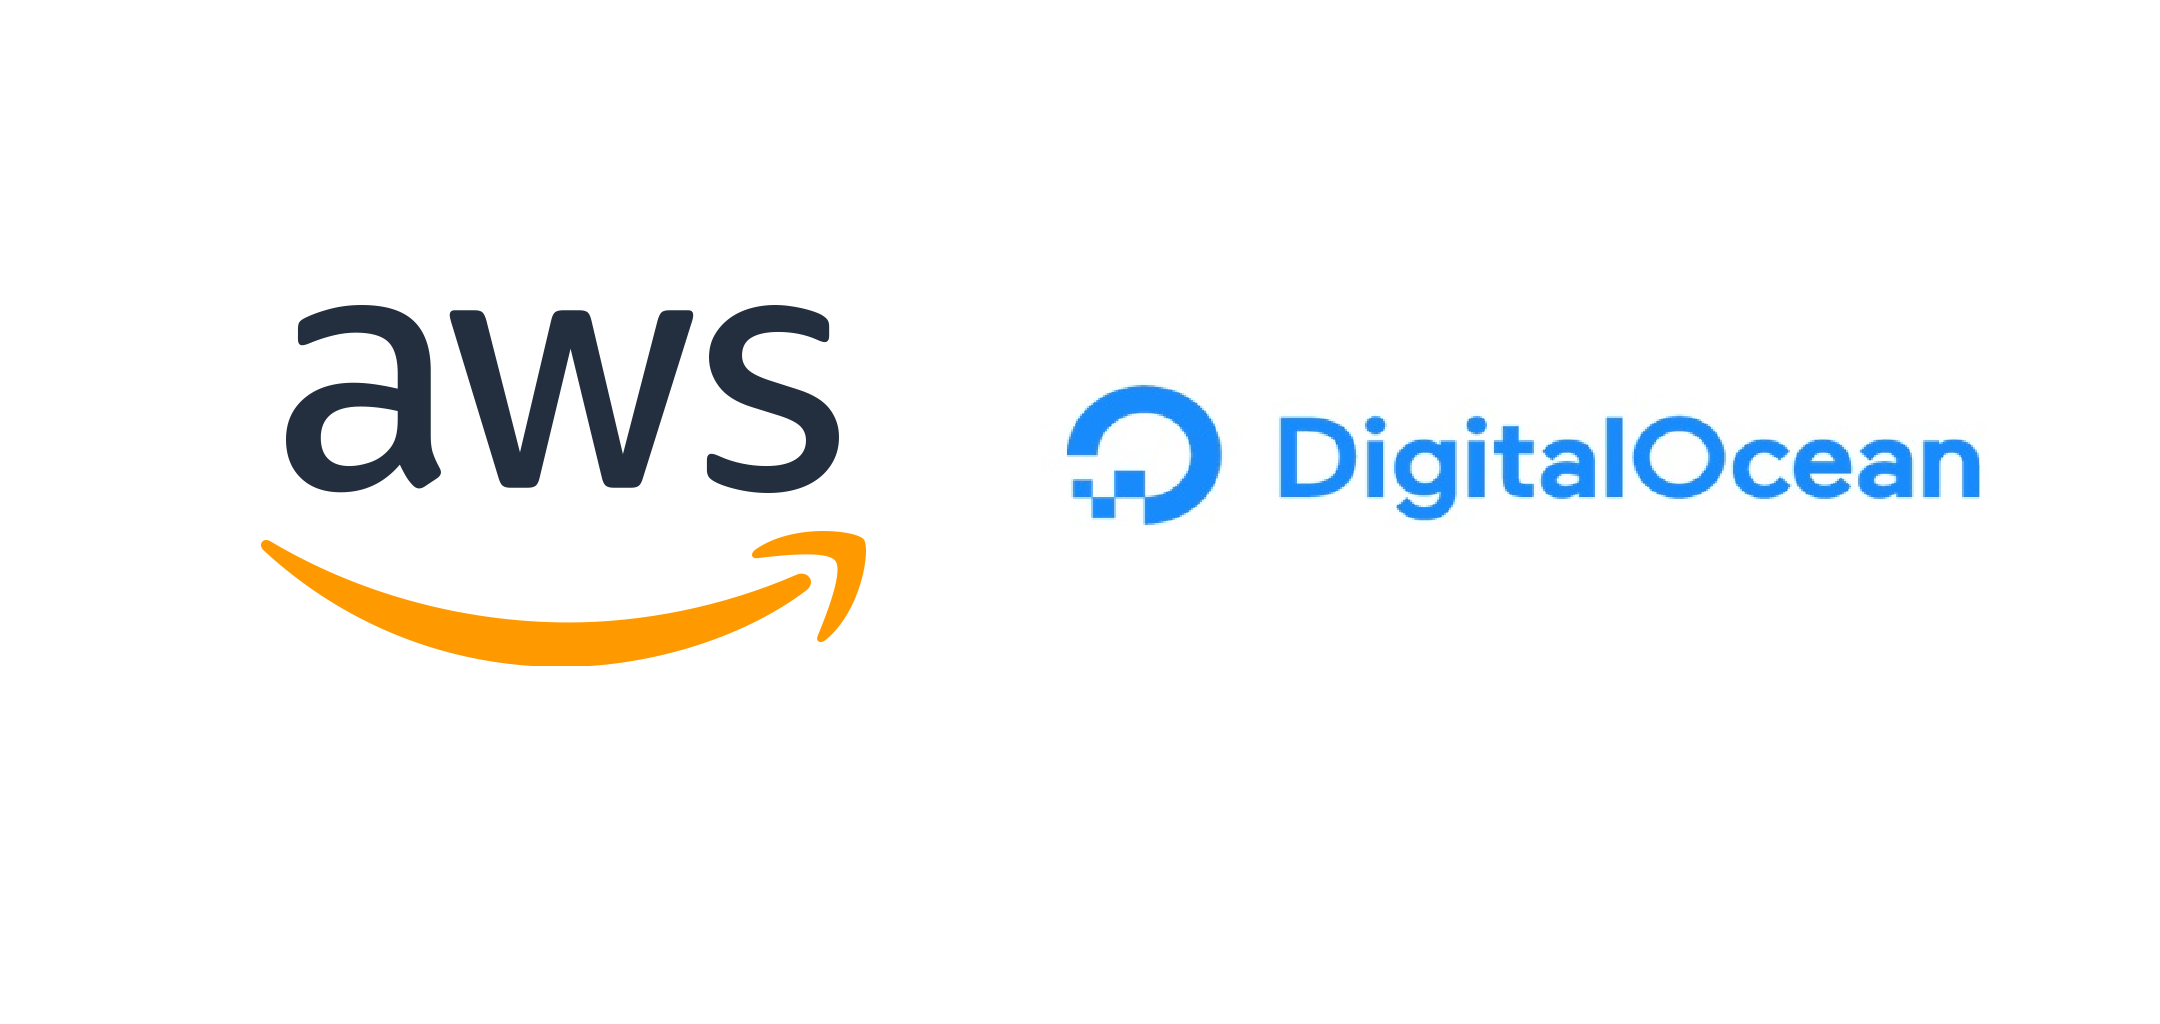 Image of AWS logo and Digital Ocean logo, side by side.